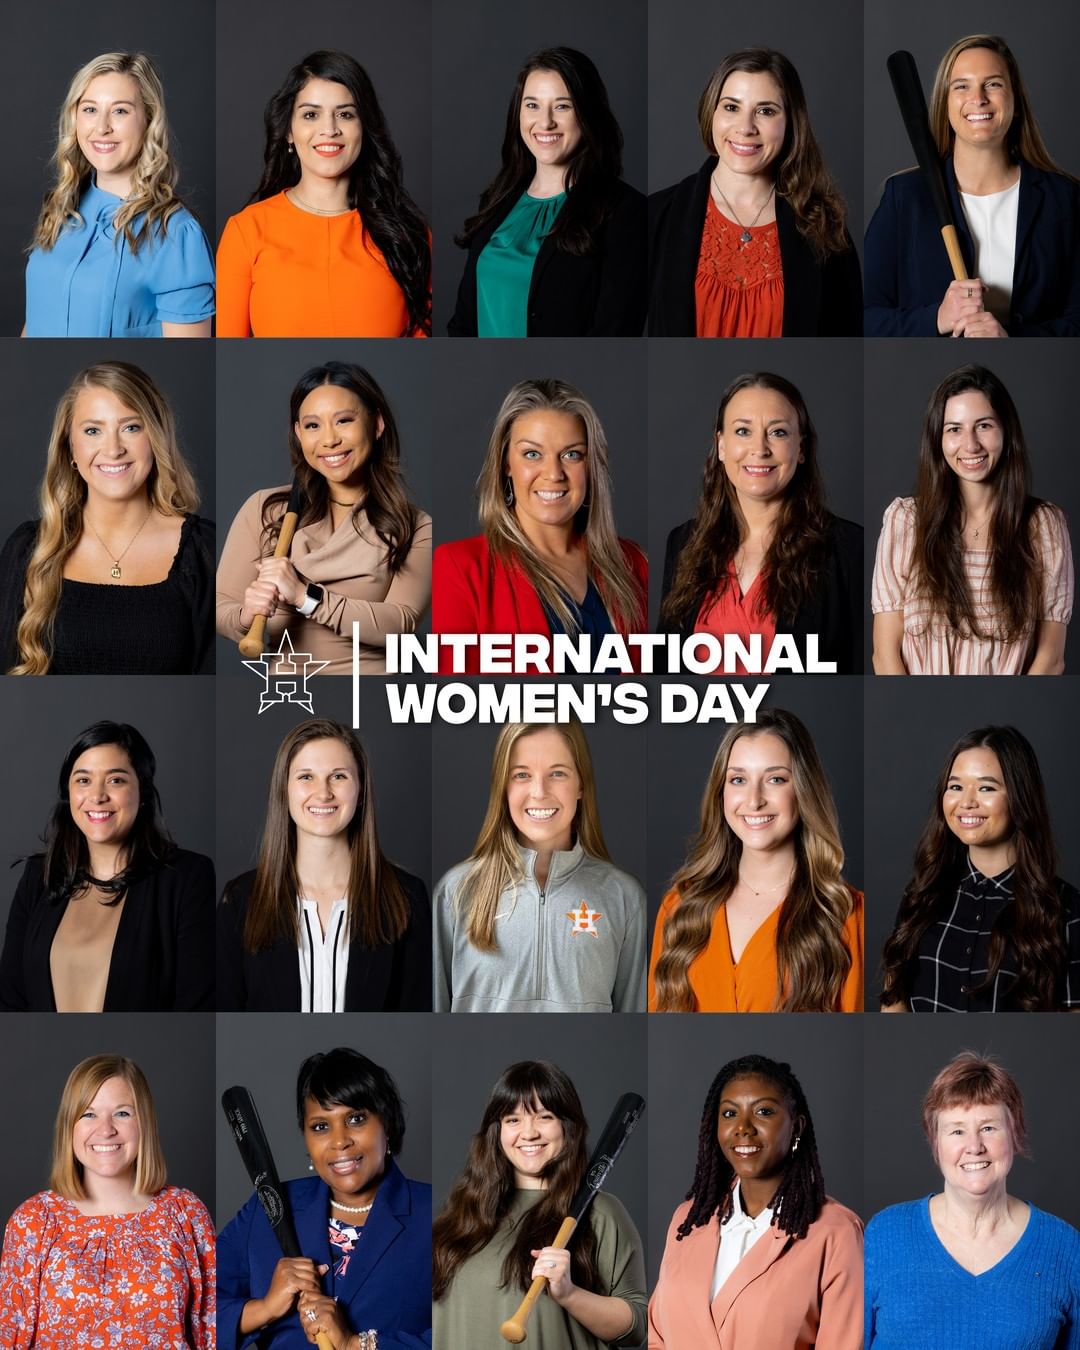 Today the Houston Astros are proud to celebrate #InternationalWomensDay and we r...